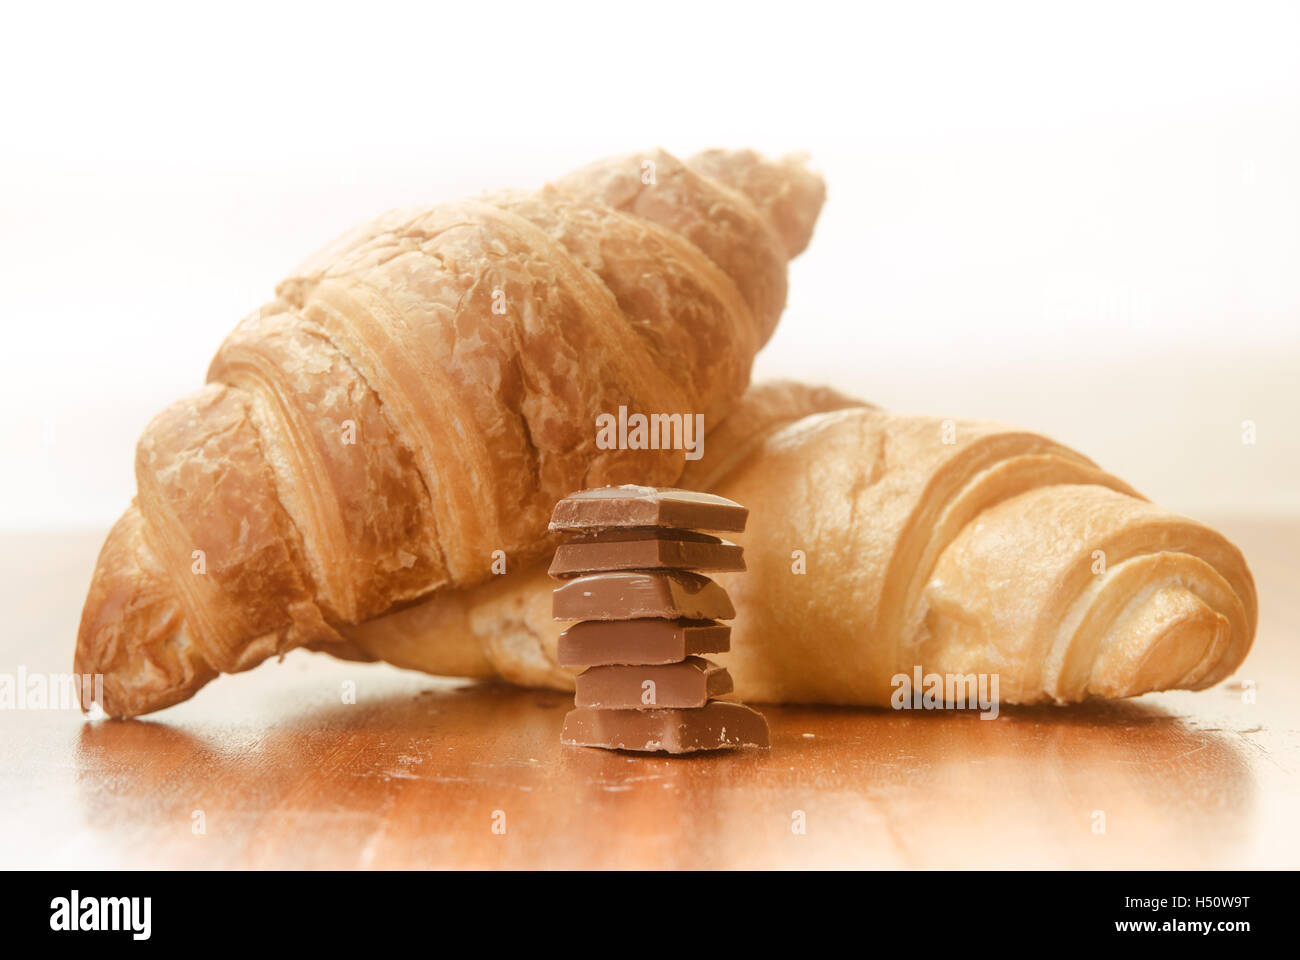 Two baked croissants with chocolate bars. Stock Photo